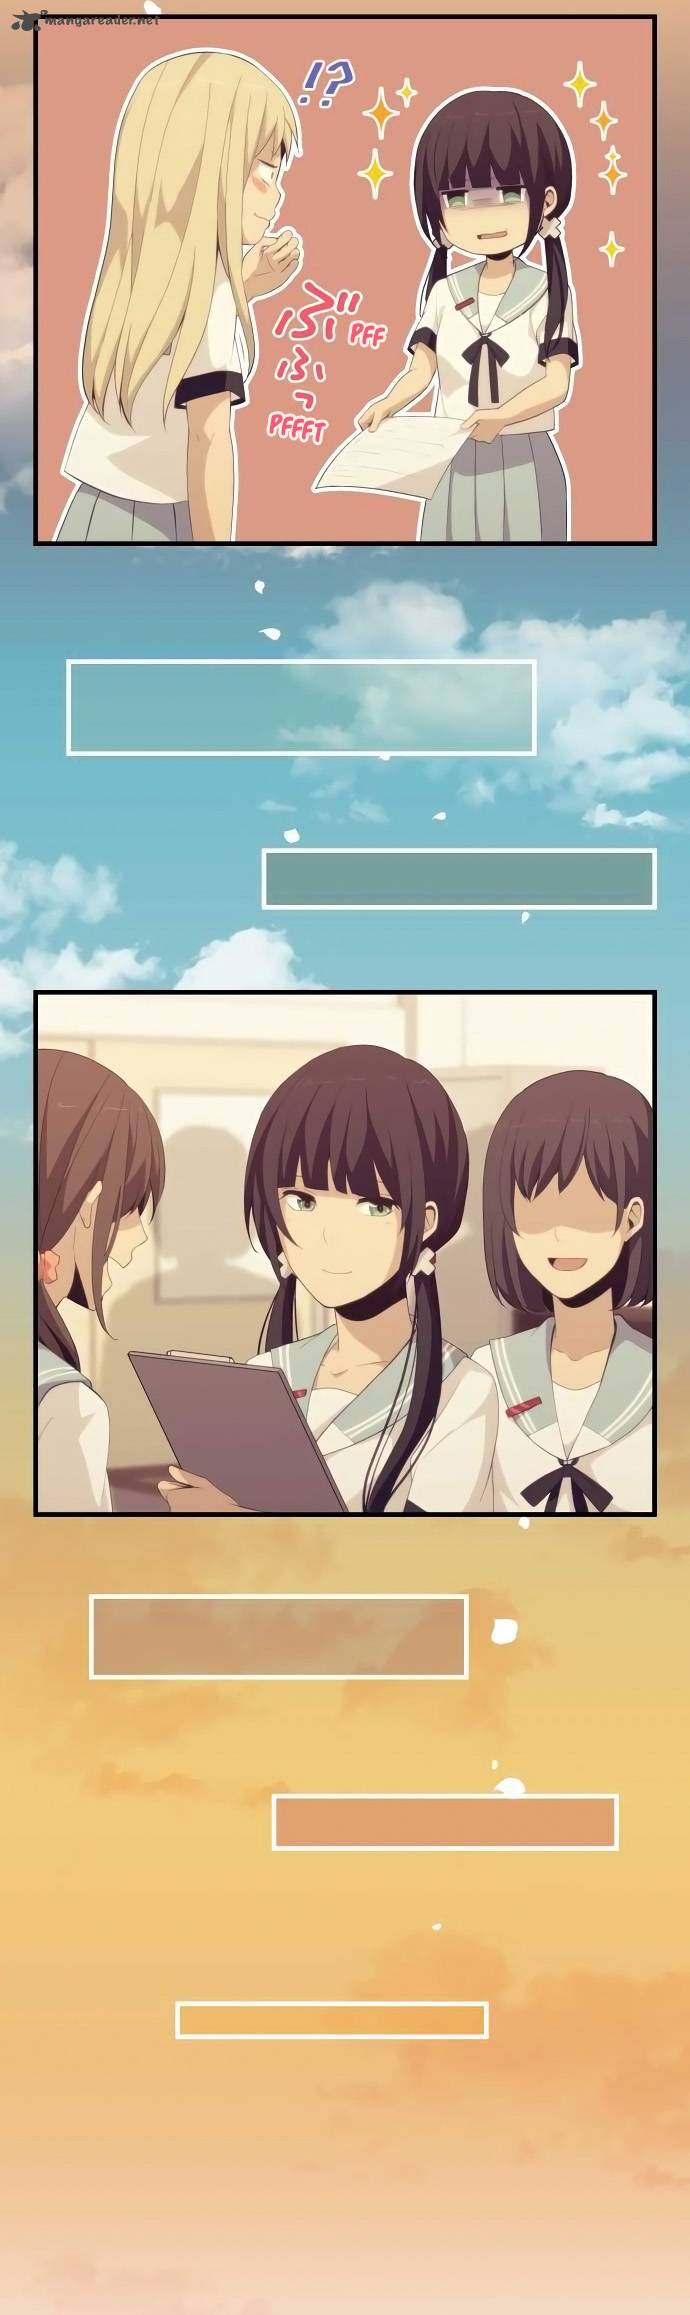 Relife 139 12